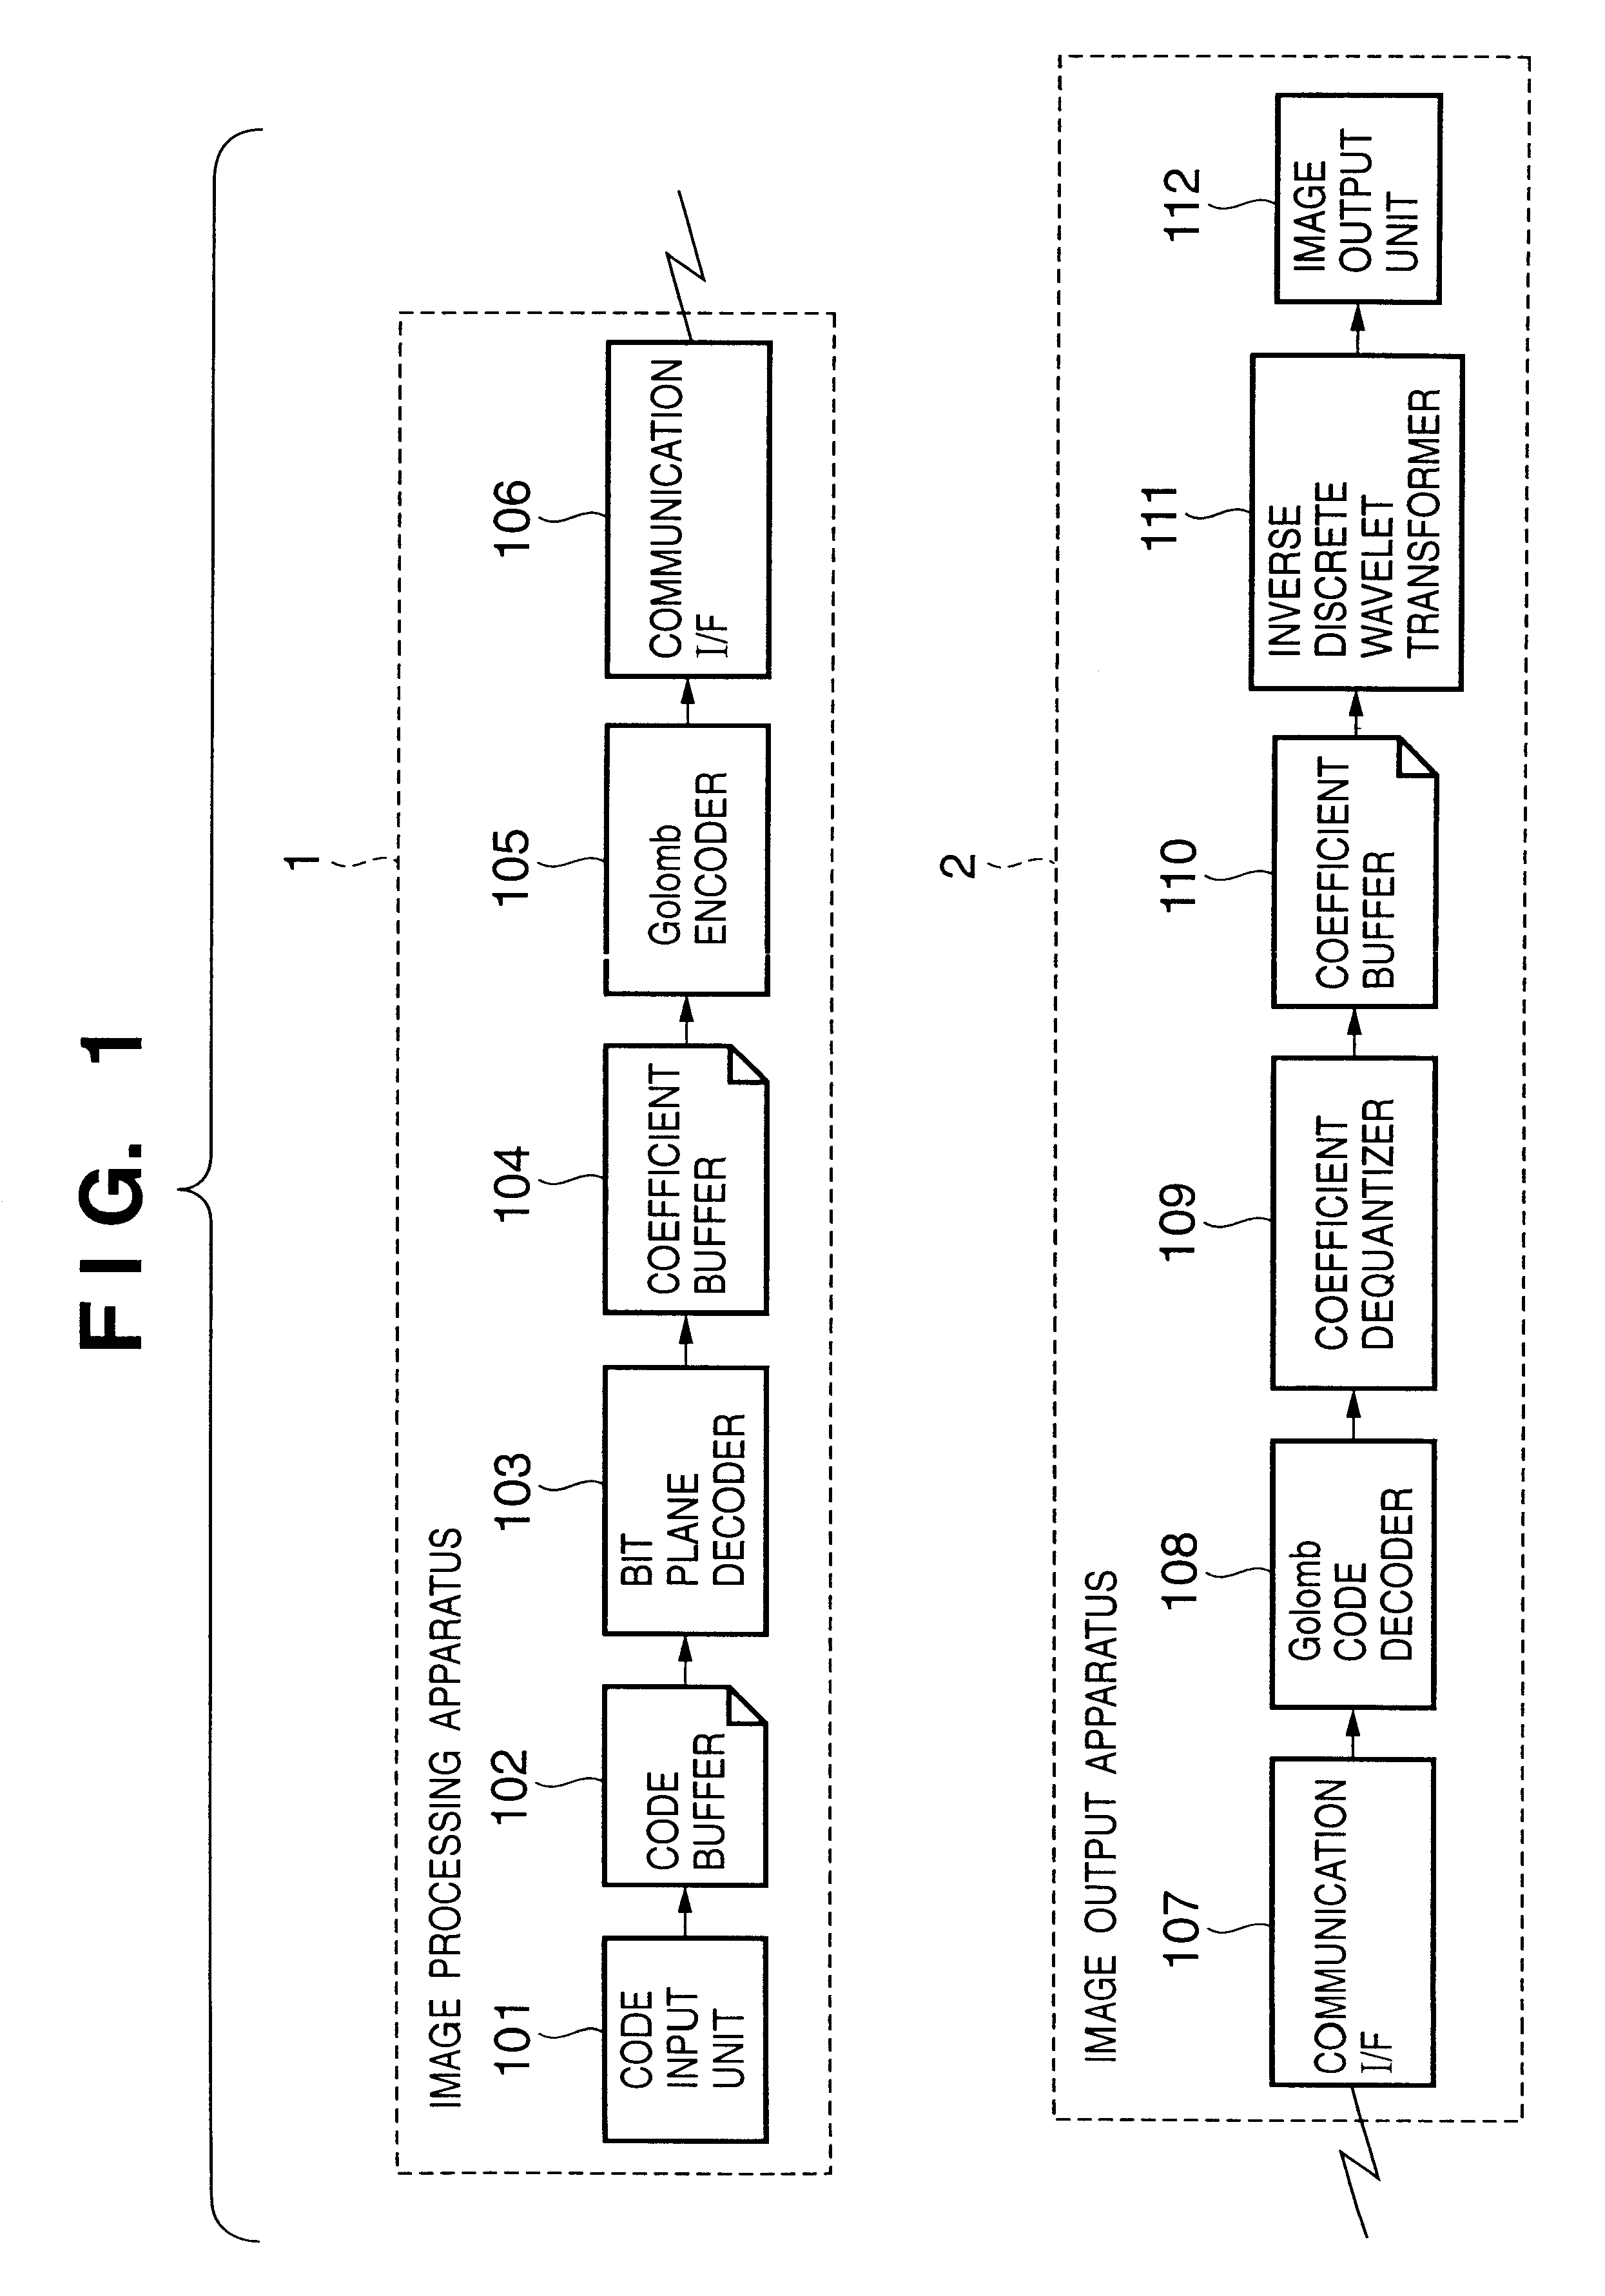 Image processing system, image processing apparatus, image input apparatus, image output apparatus and method, and storage medium